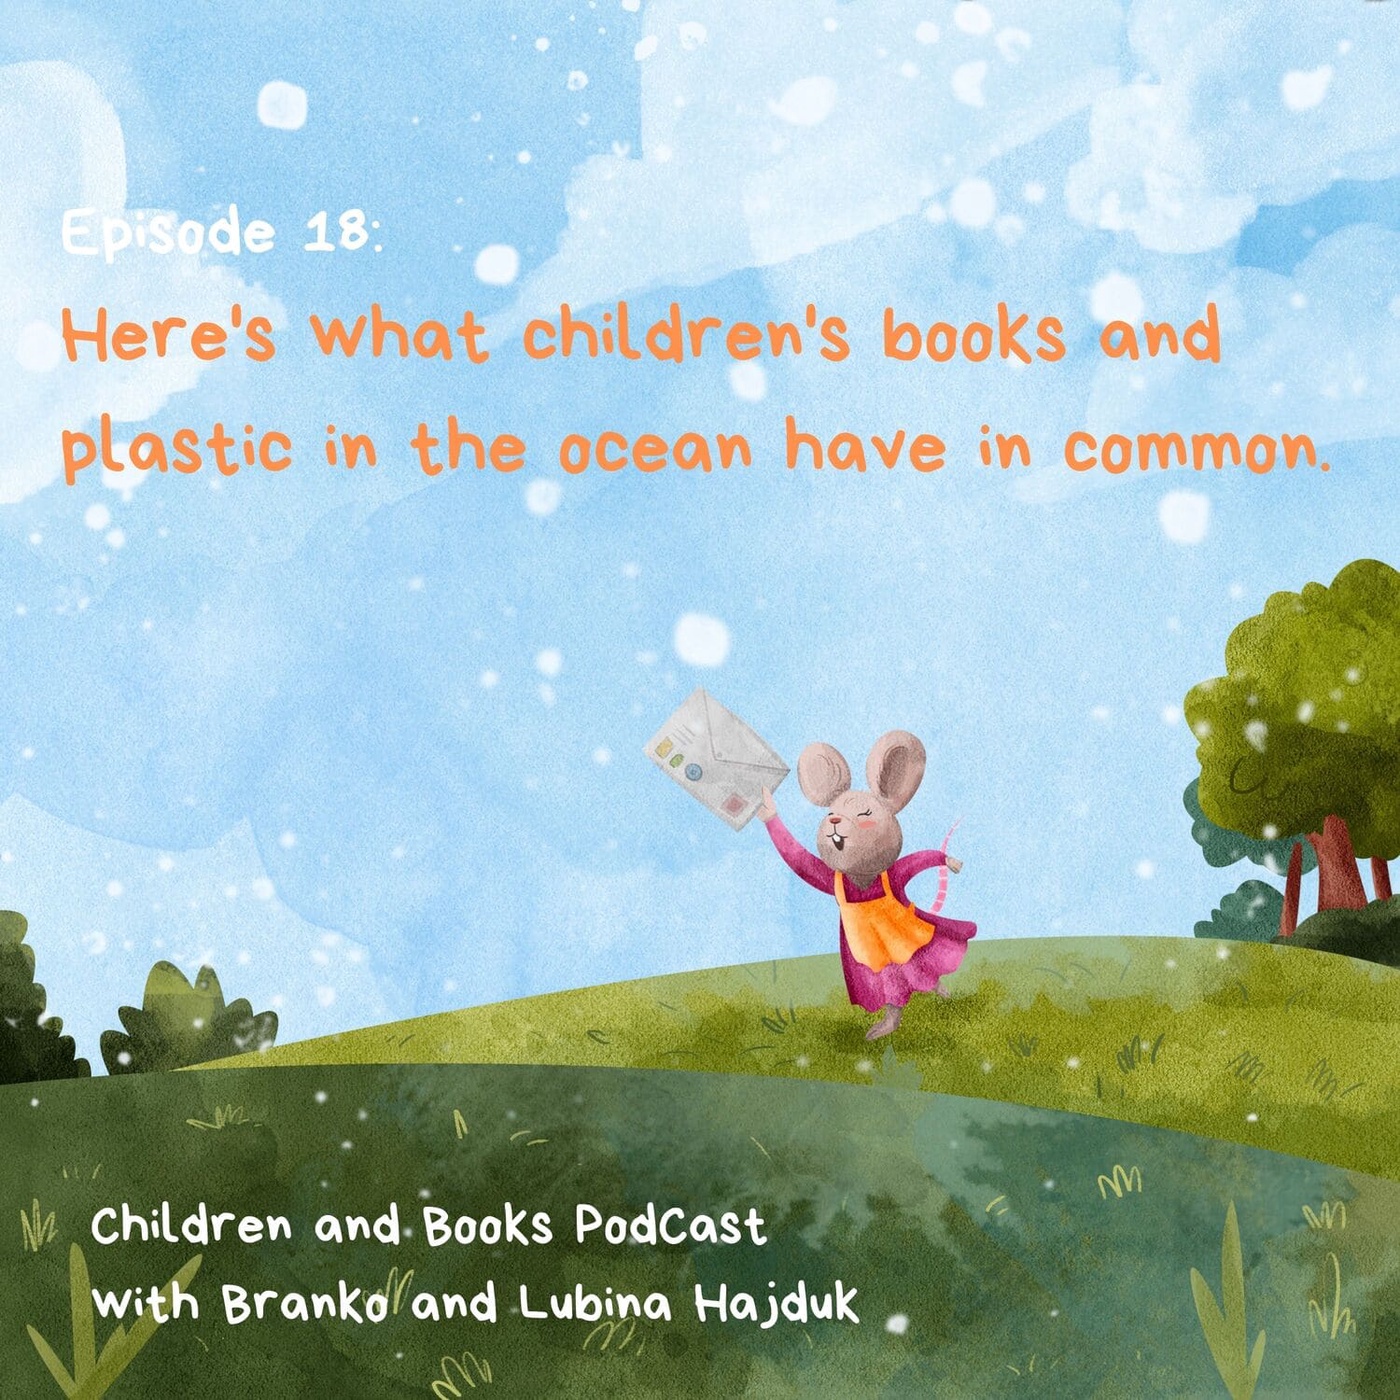 Here's what children's books and plastic in the ocean have to do with each other - Children and Books